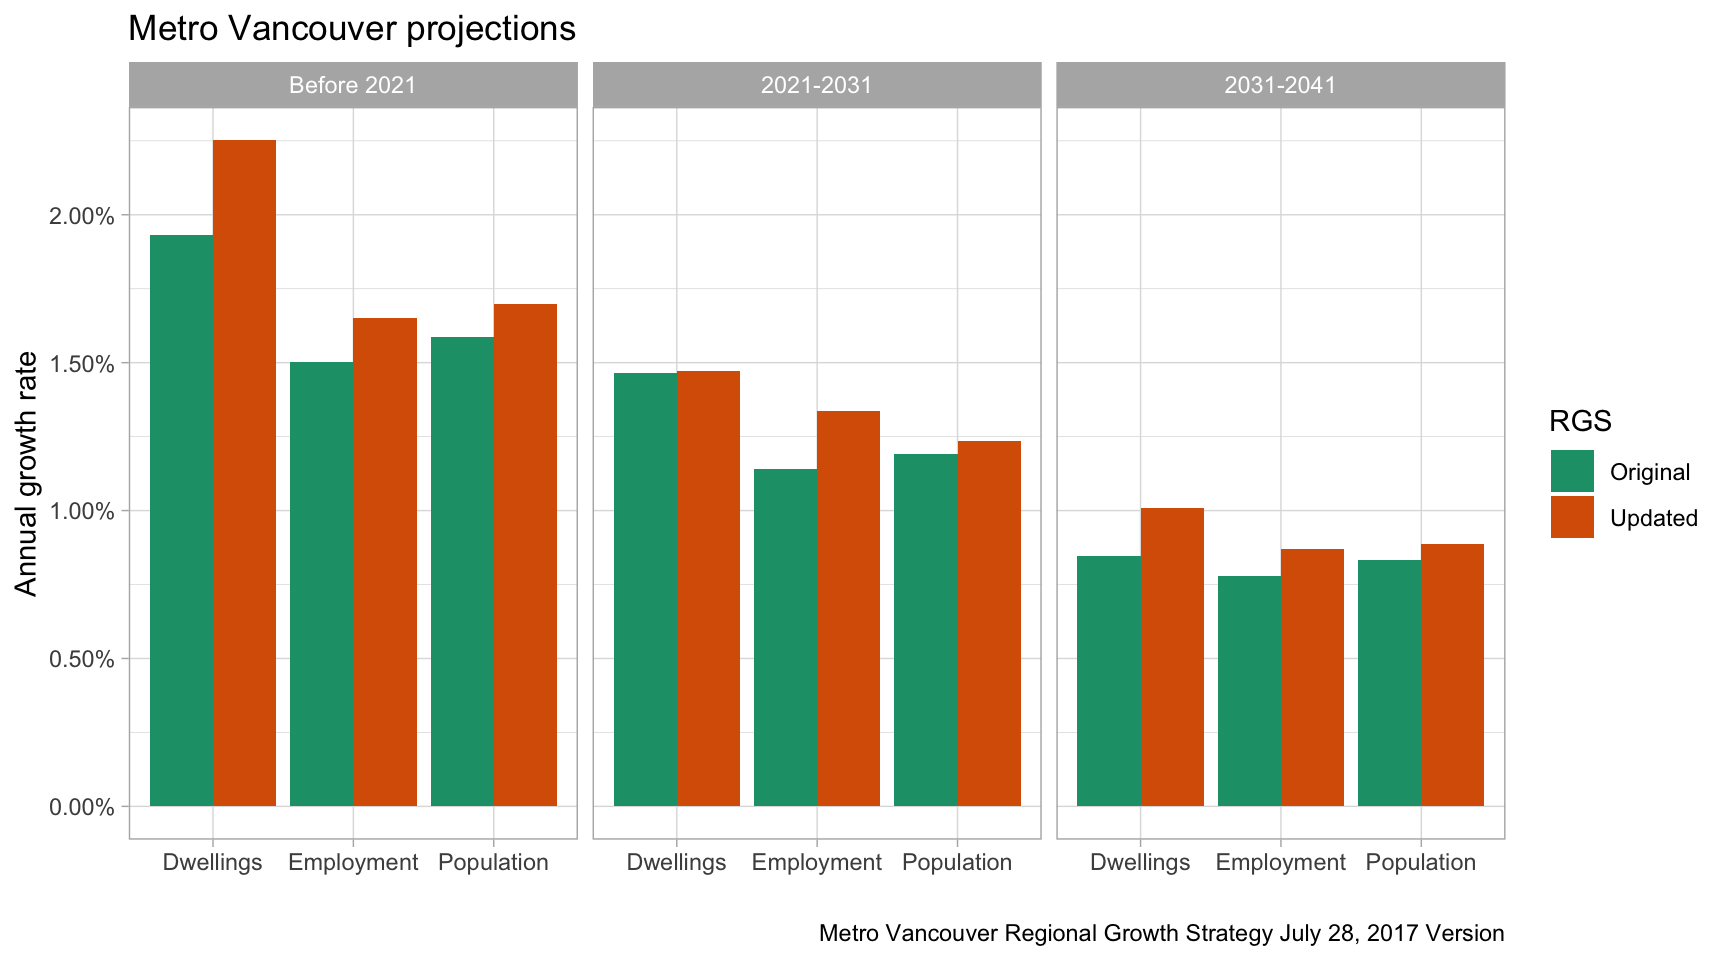 On Vancouver population projections